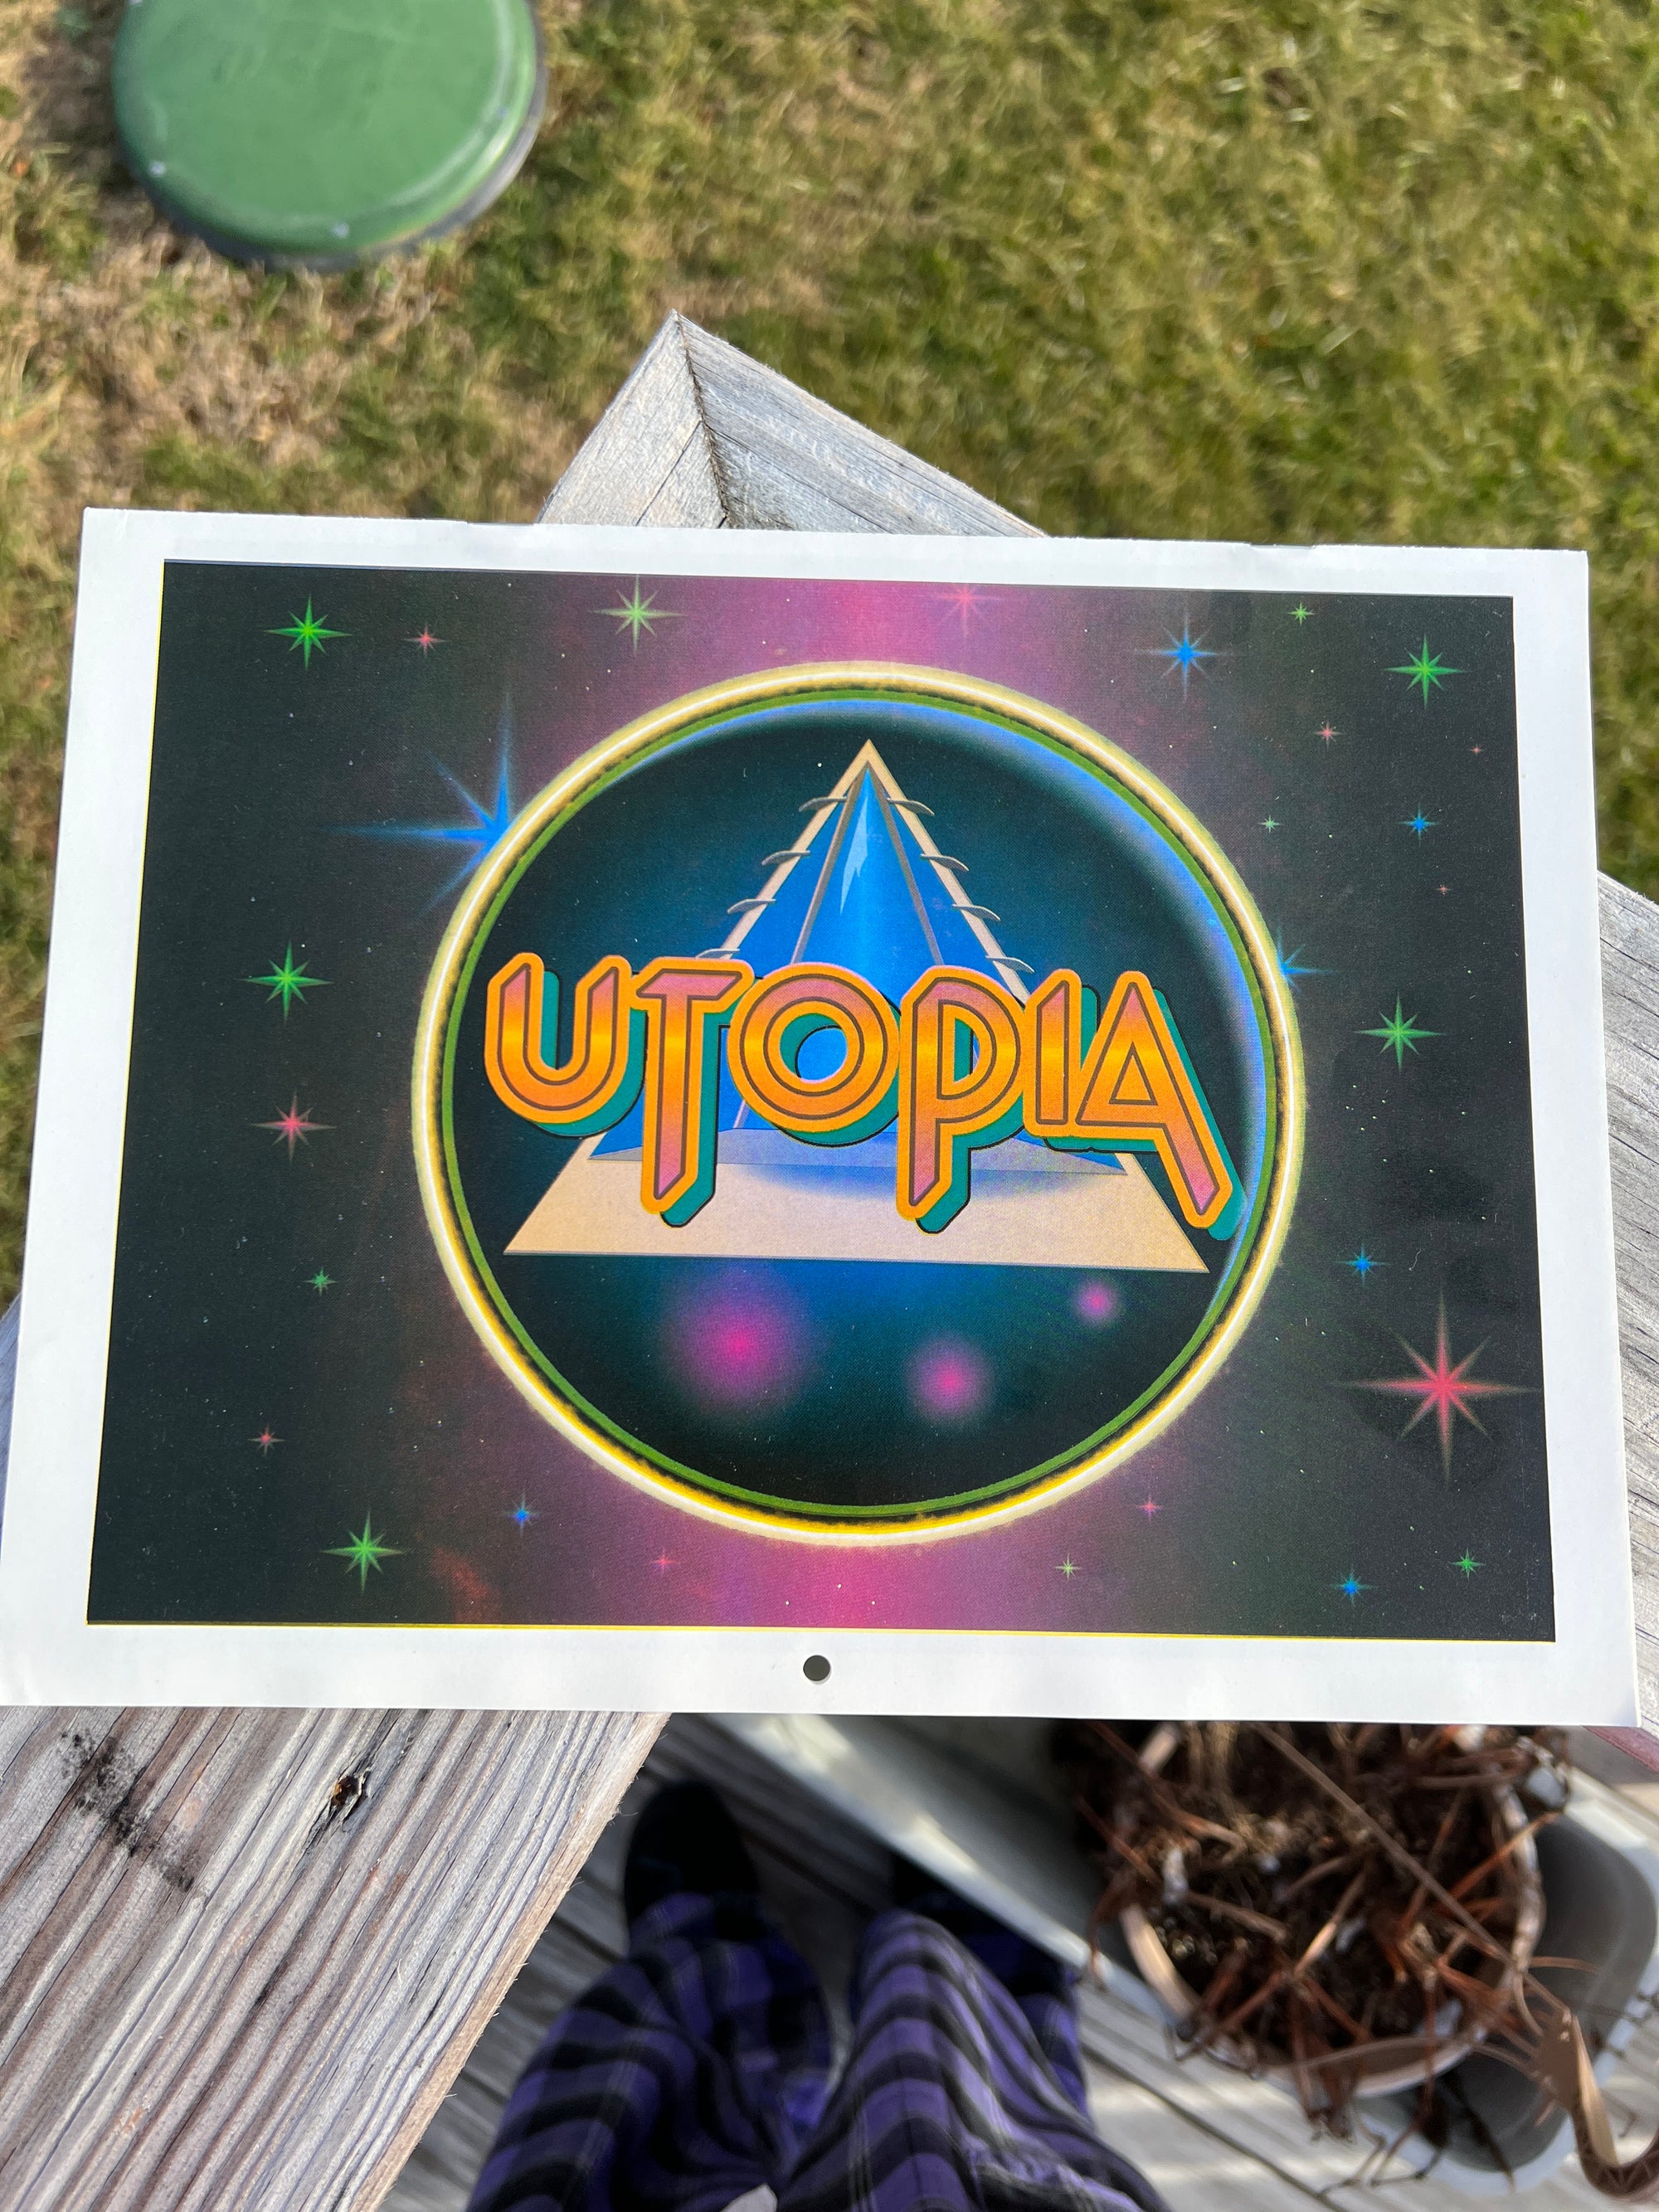 1989 and 1995 Utopia Times Calendar -  Works for 2023!!